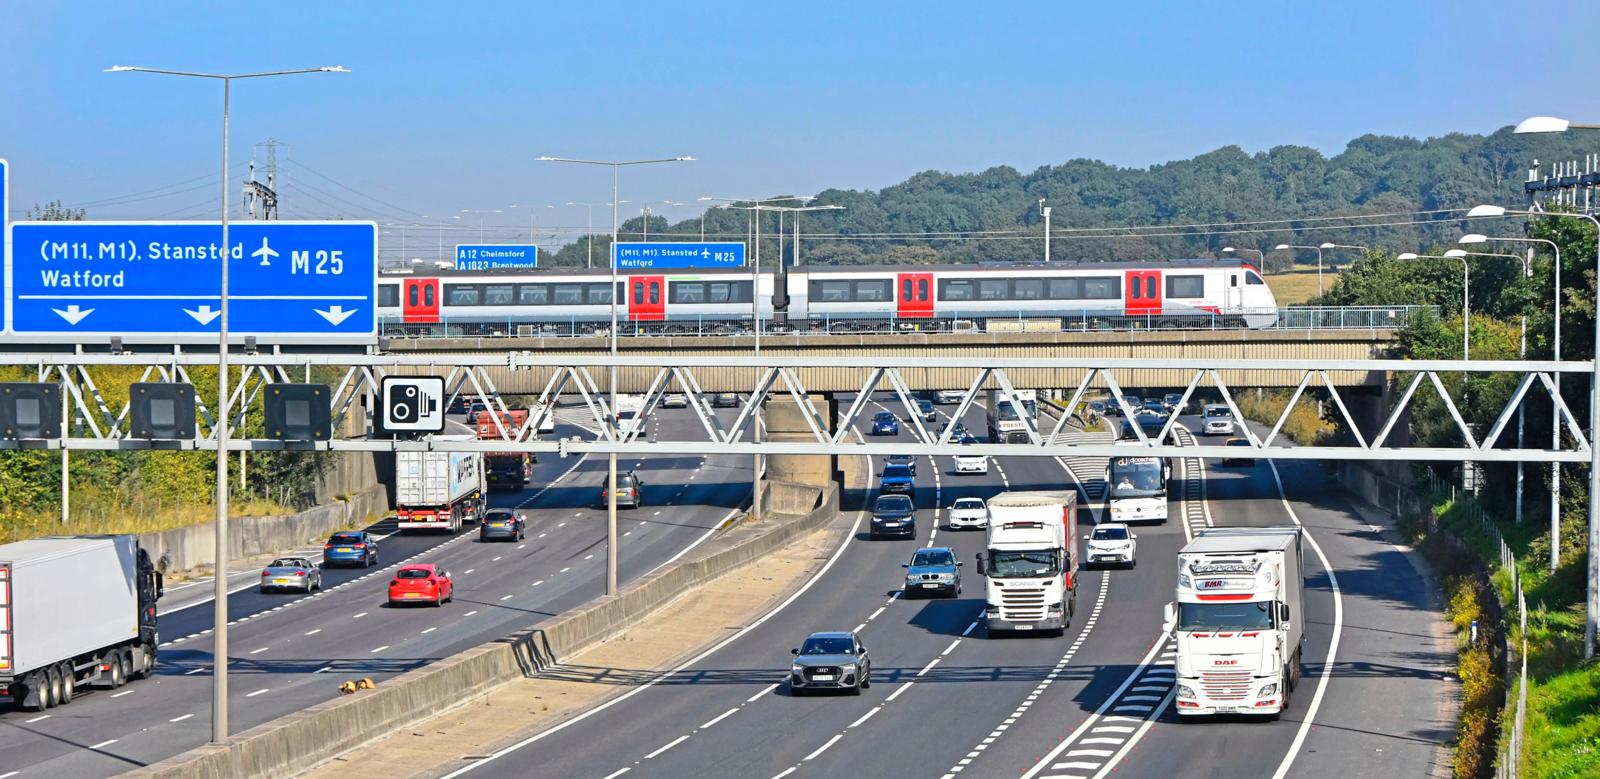 A Greater Anglia passenger train crosses over the M25 at Brentwood.